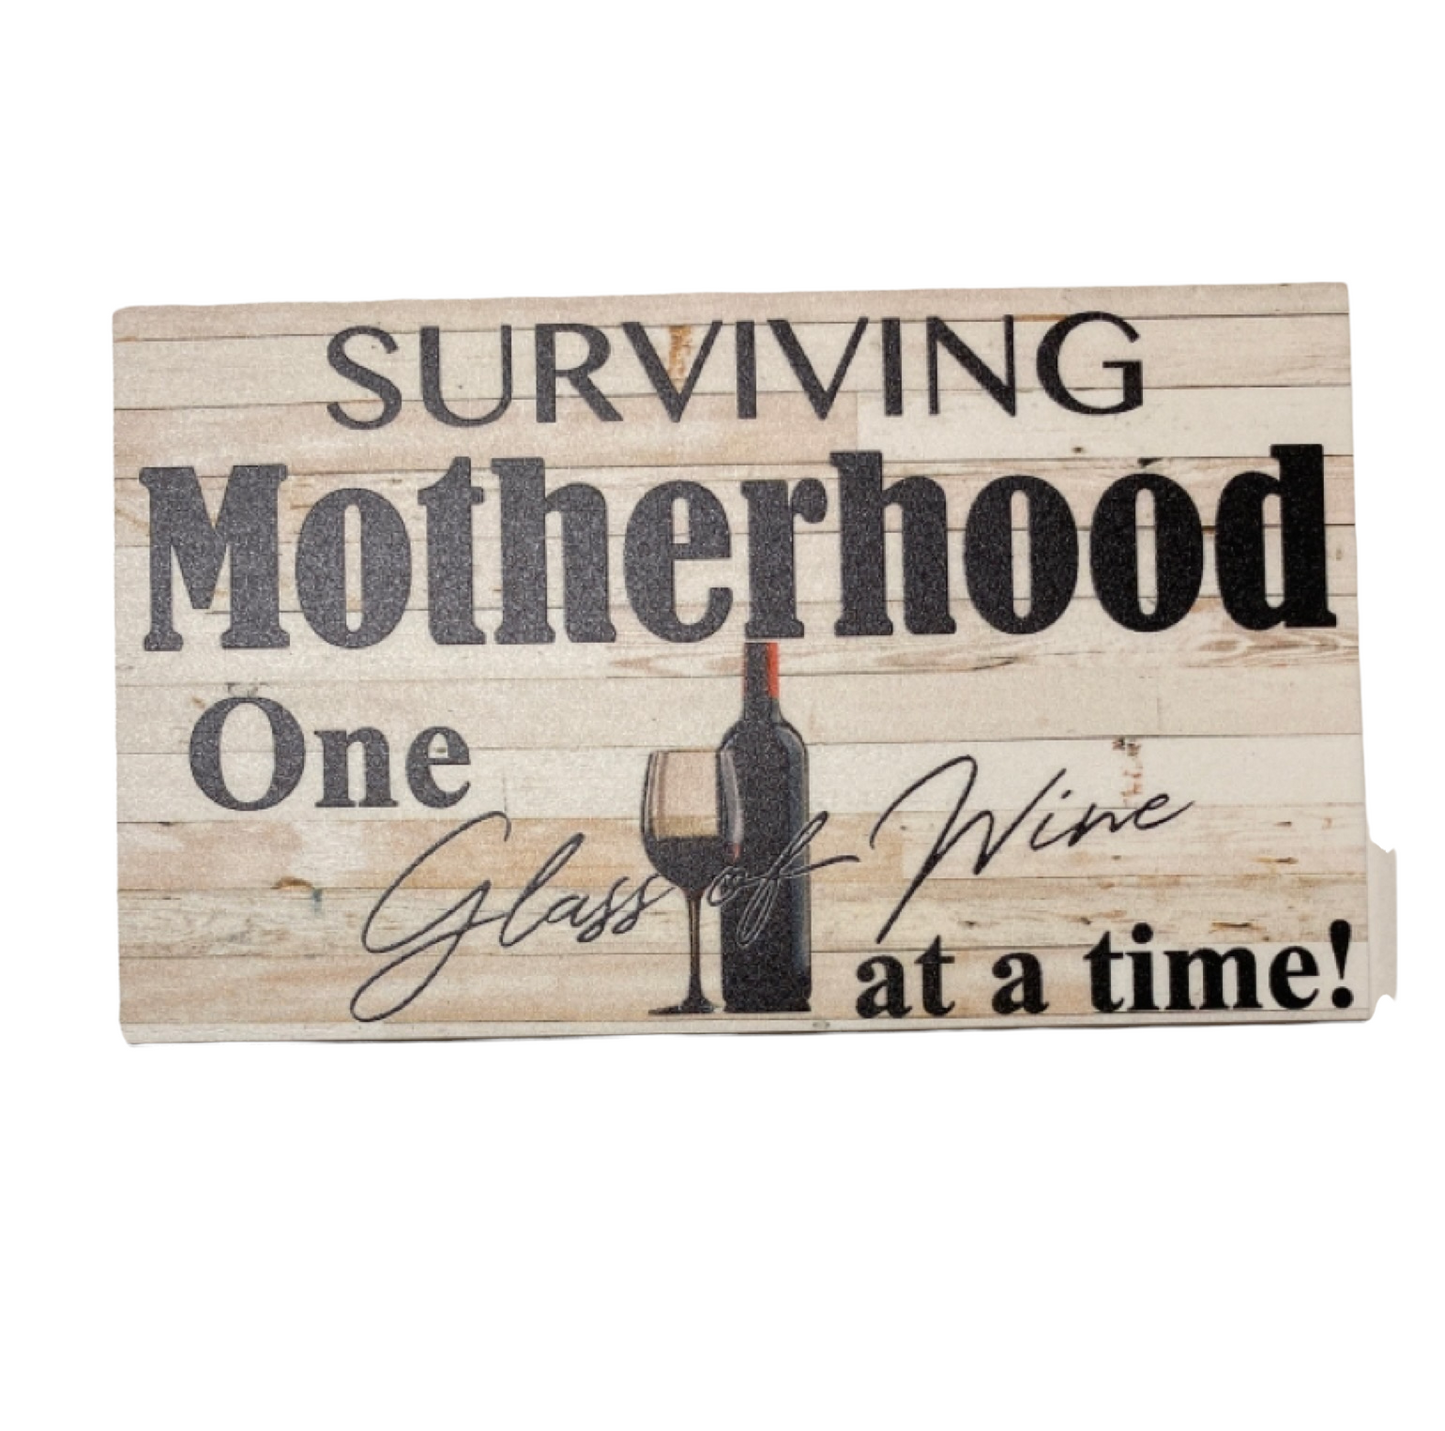 Surviving Motherhood Mother Mum Wine Sign - The Renmy Store Homewares & Gifts 